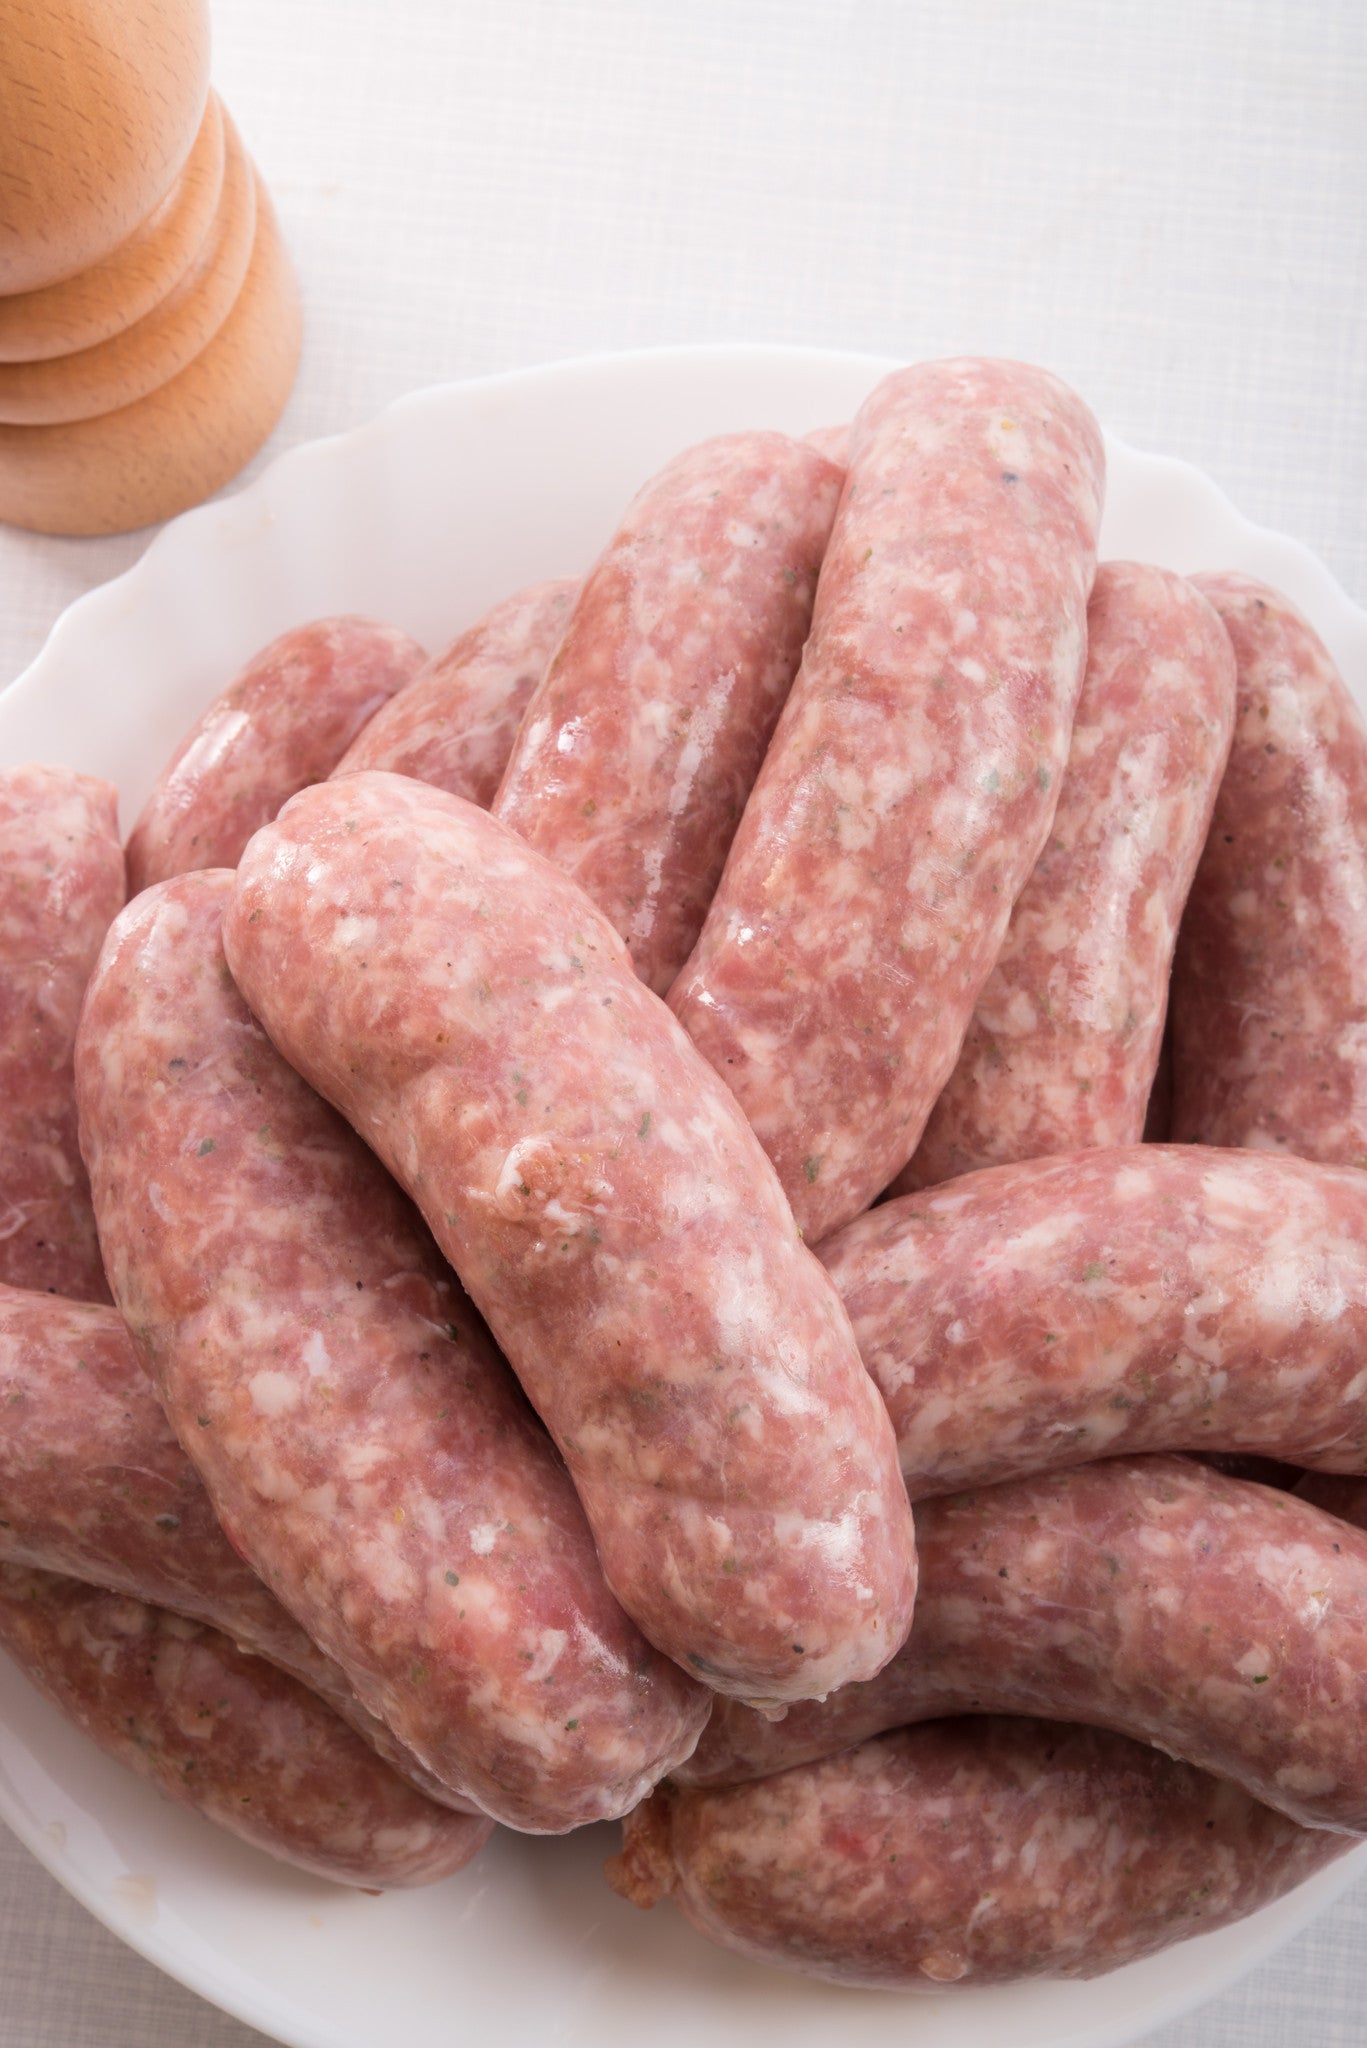 Pork and Black Pudding Sausage - The Cheshire Butcher